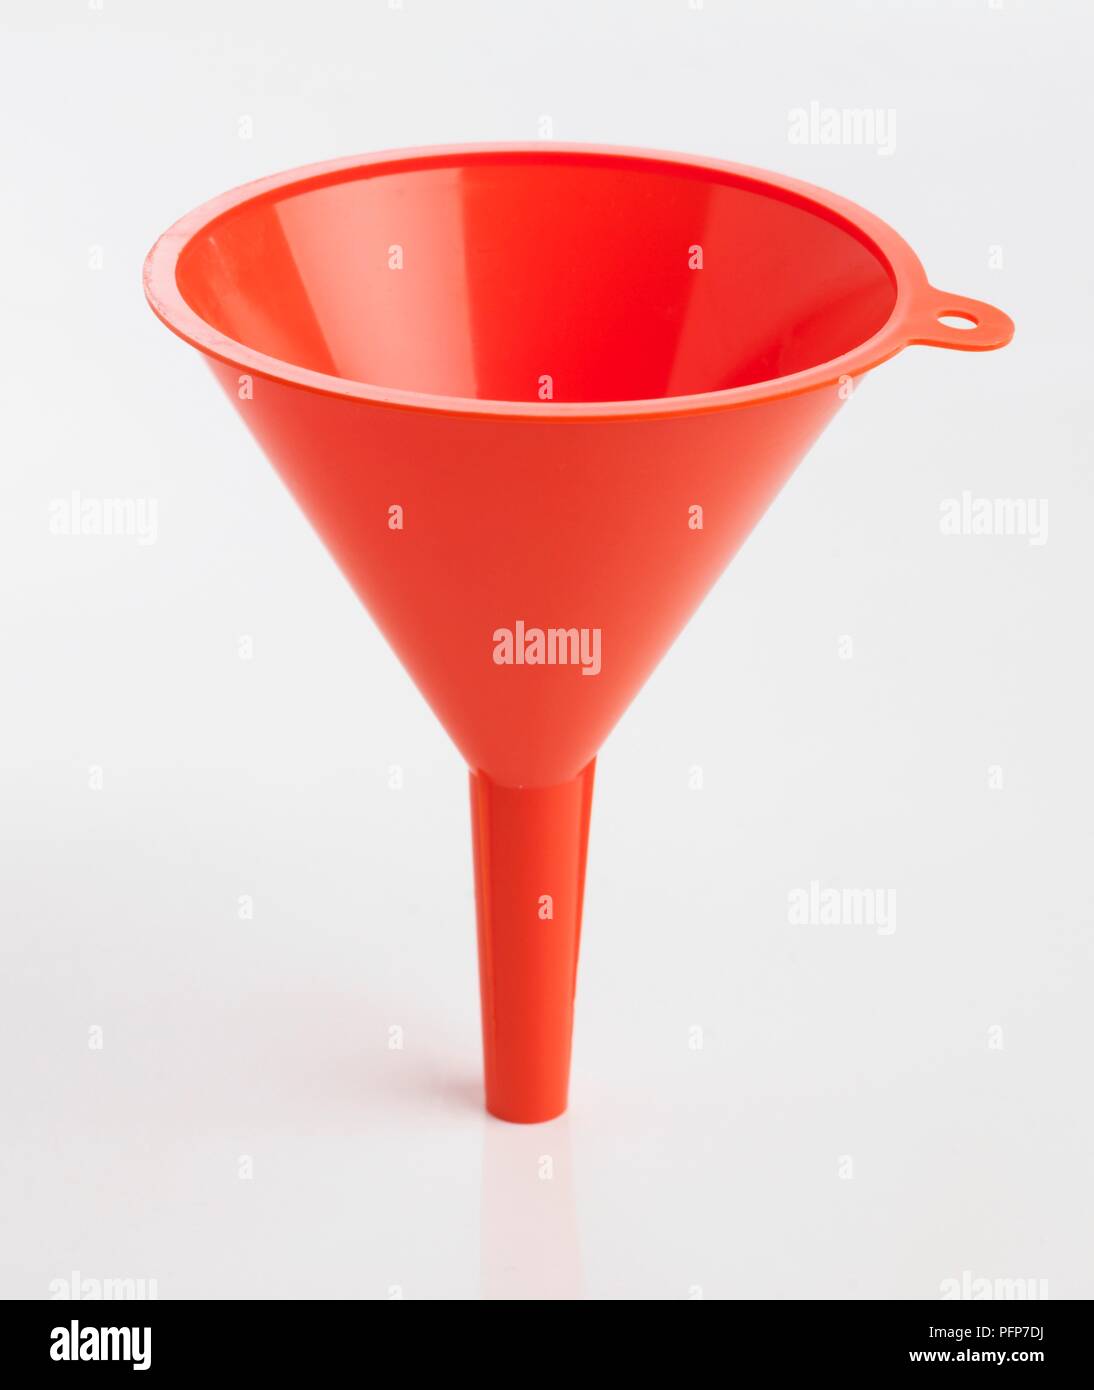 Red plastic funnel Stock Photo